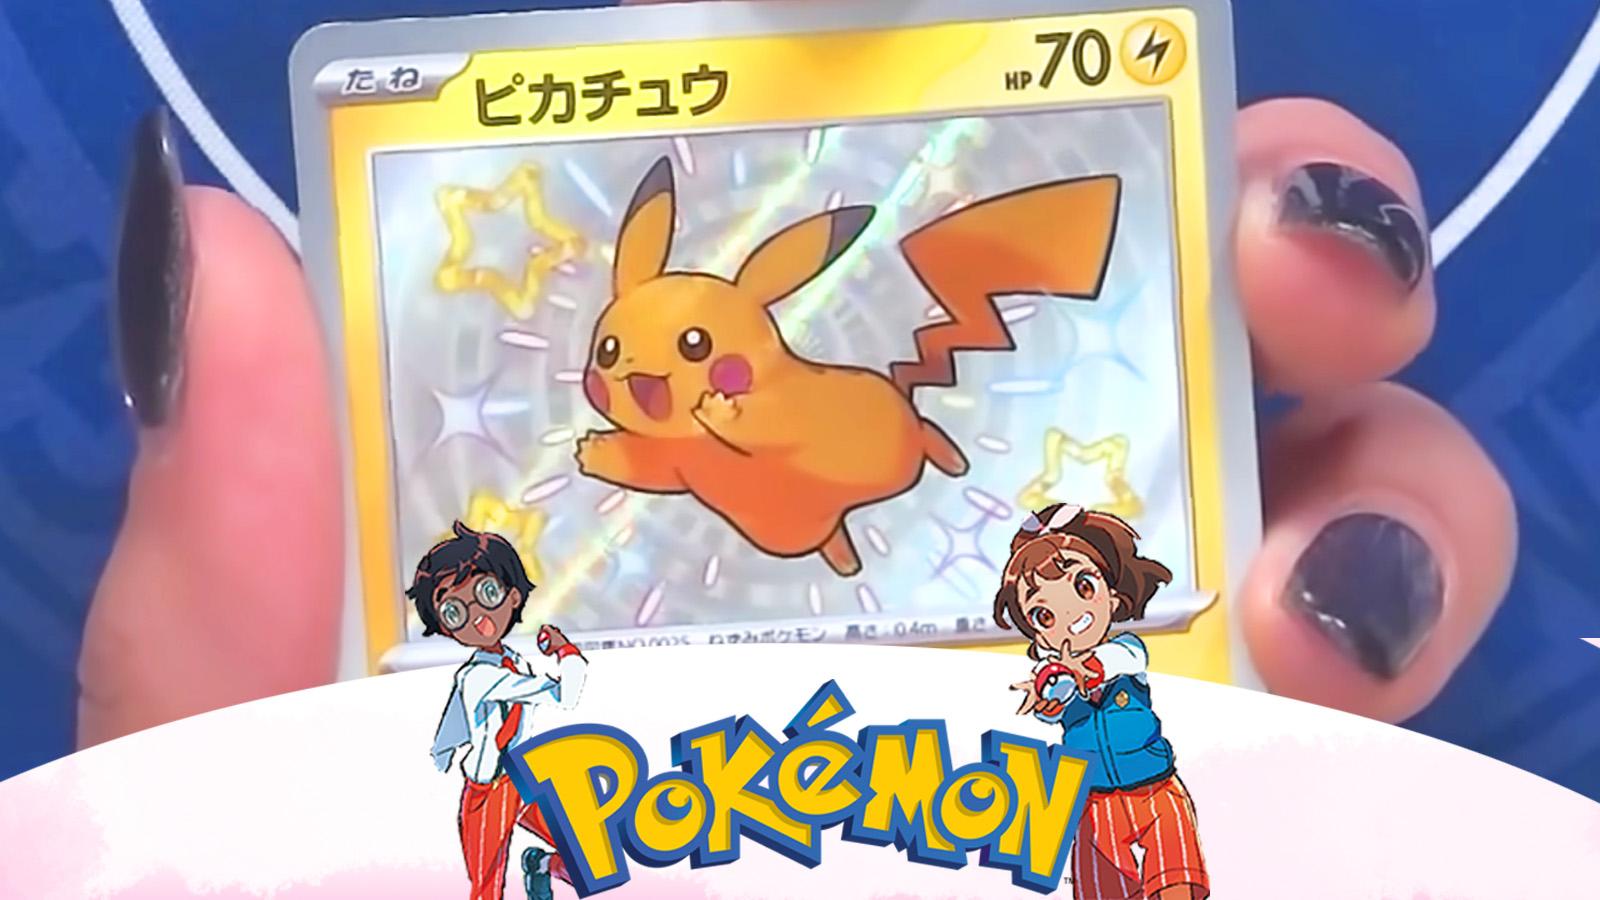 Paldean Students, a Pokemon logo and a Pikachu from shiny treasures ex